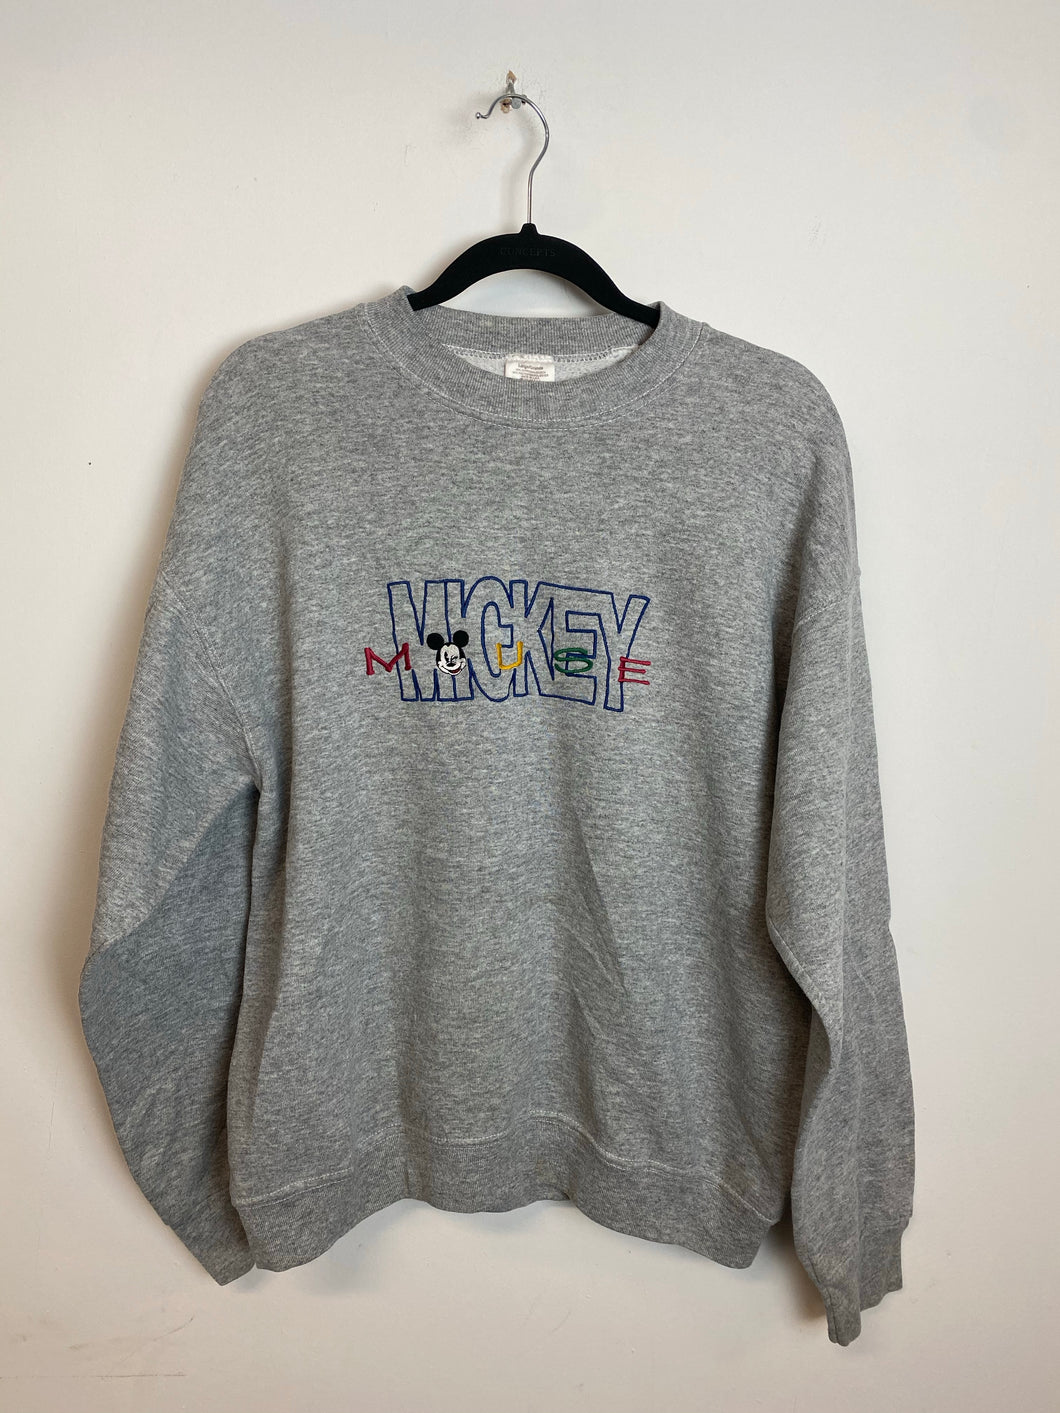 Vintage Embroidered Mickey Mouse Crewneck - XS/S